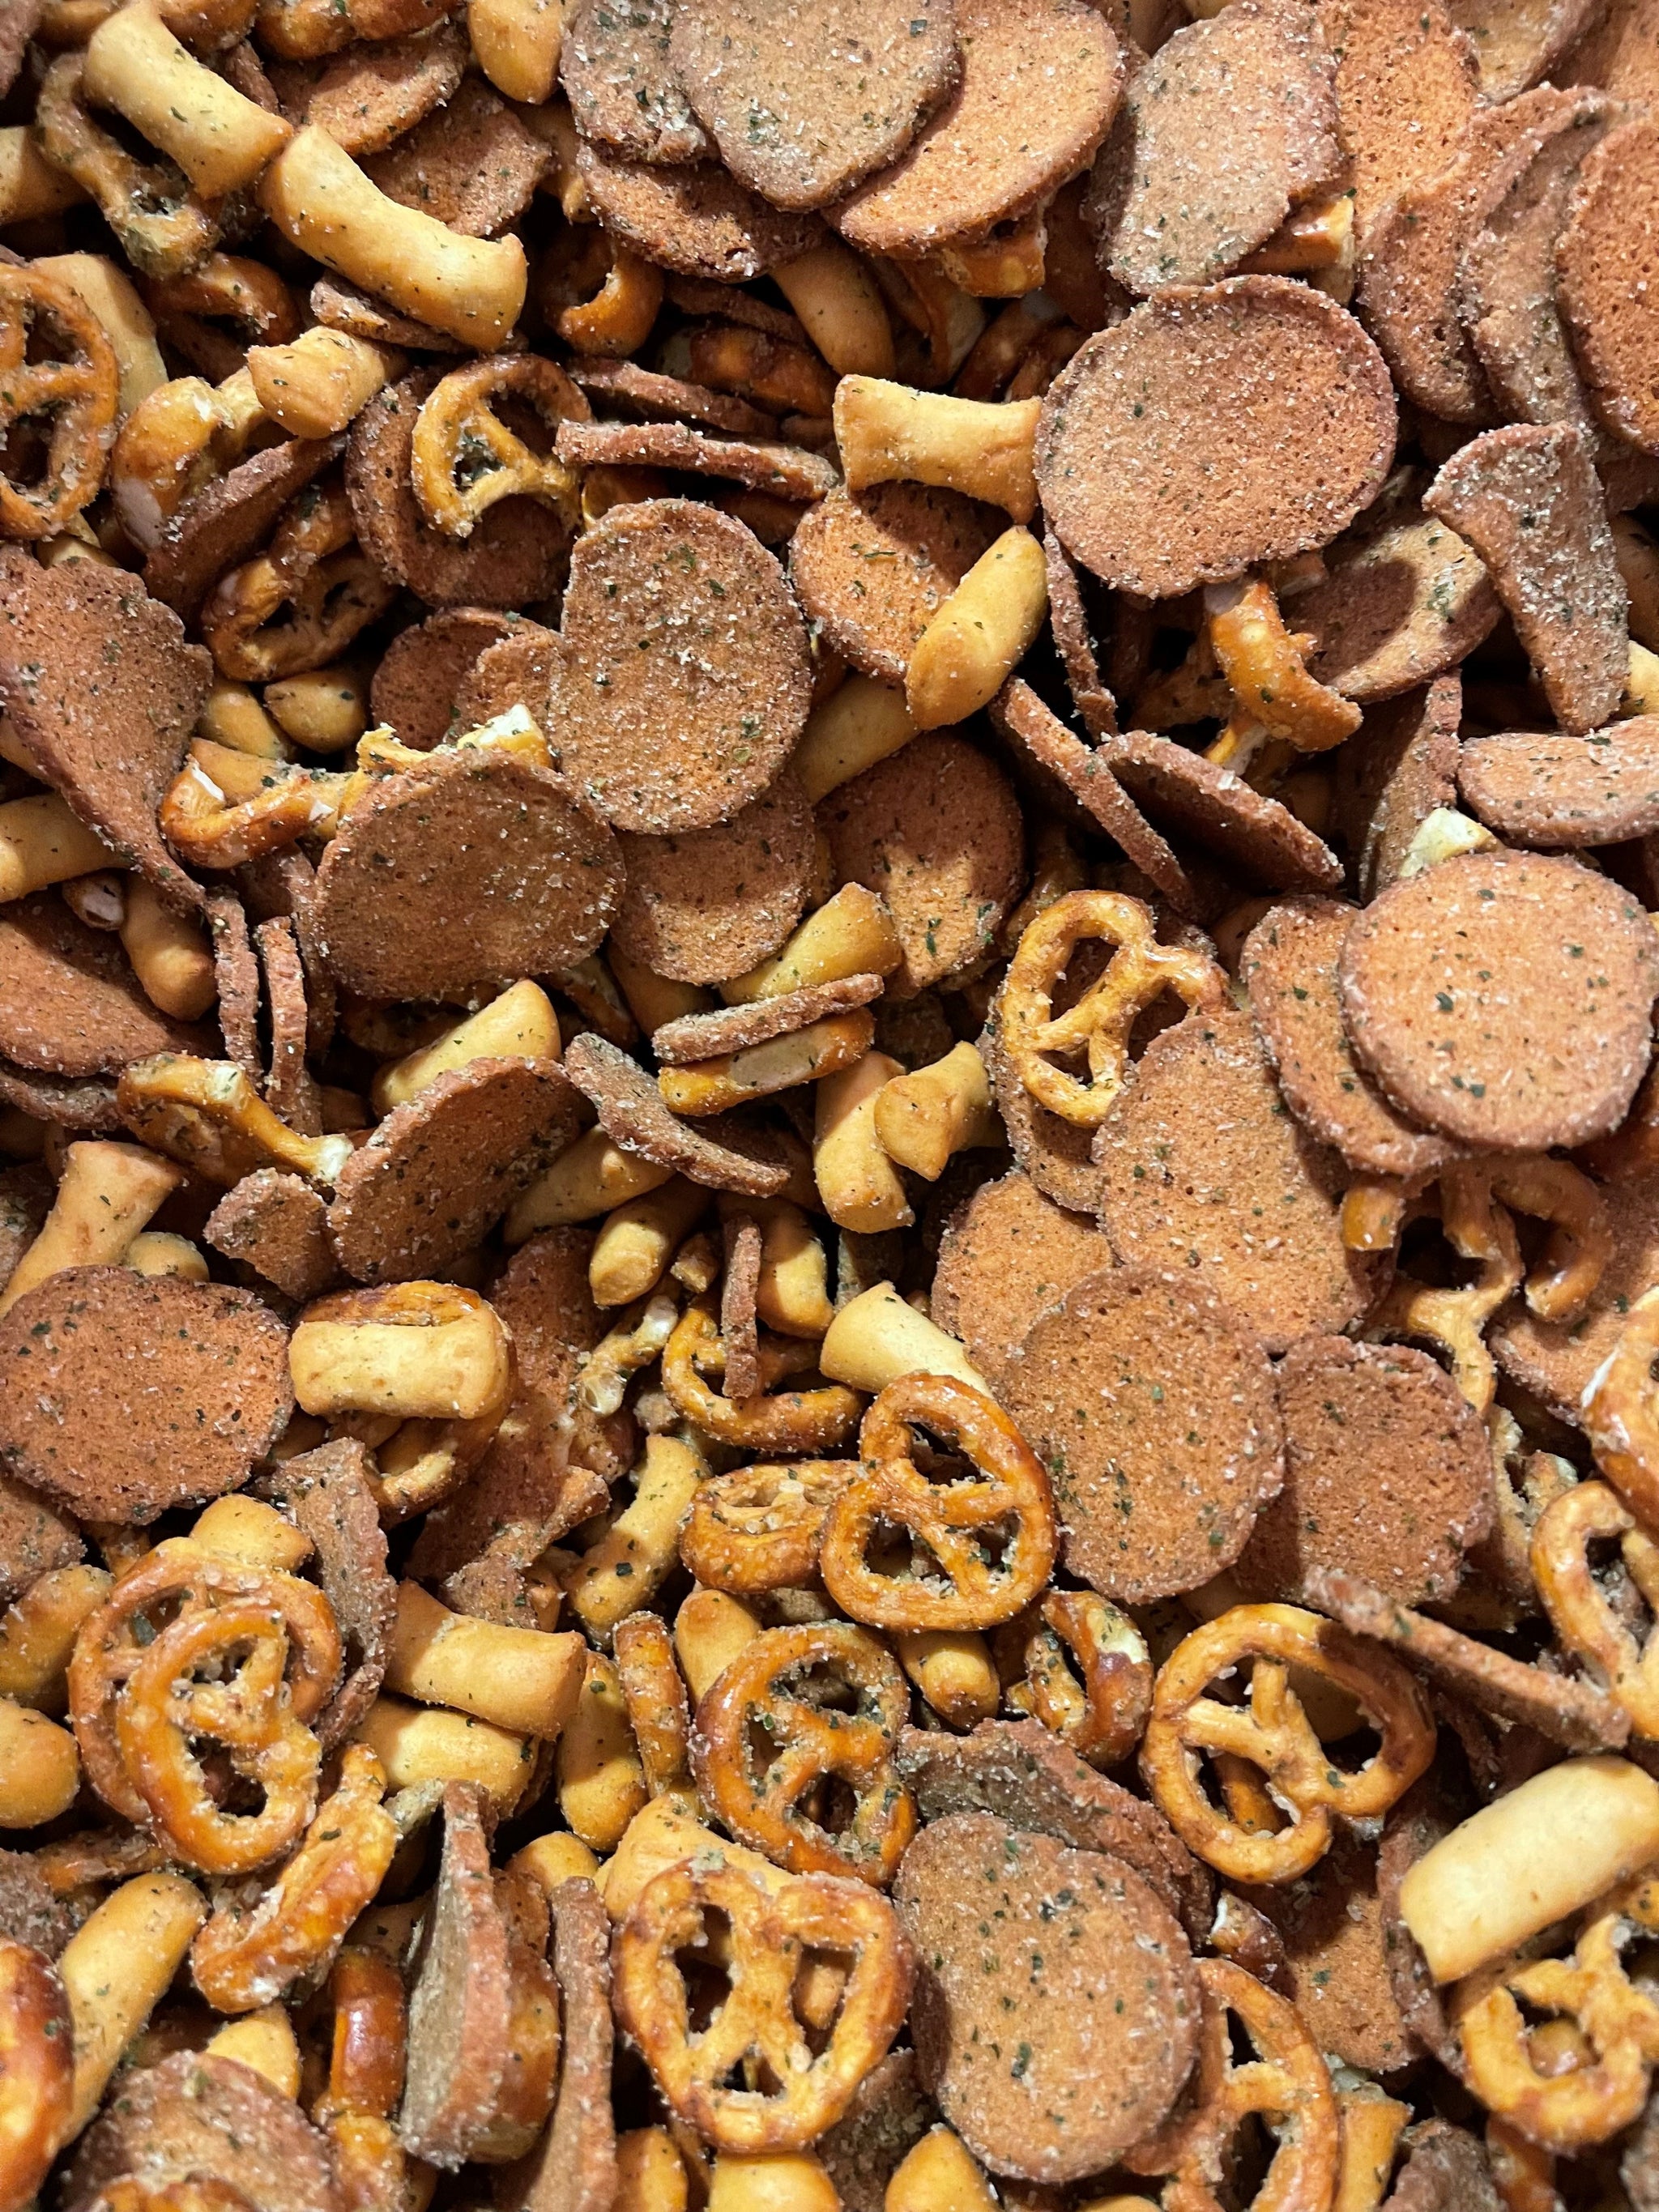 Snack Mix And Nuts